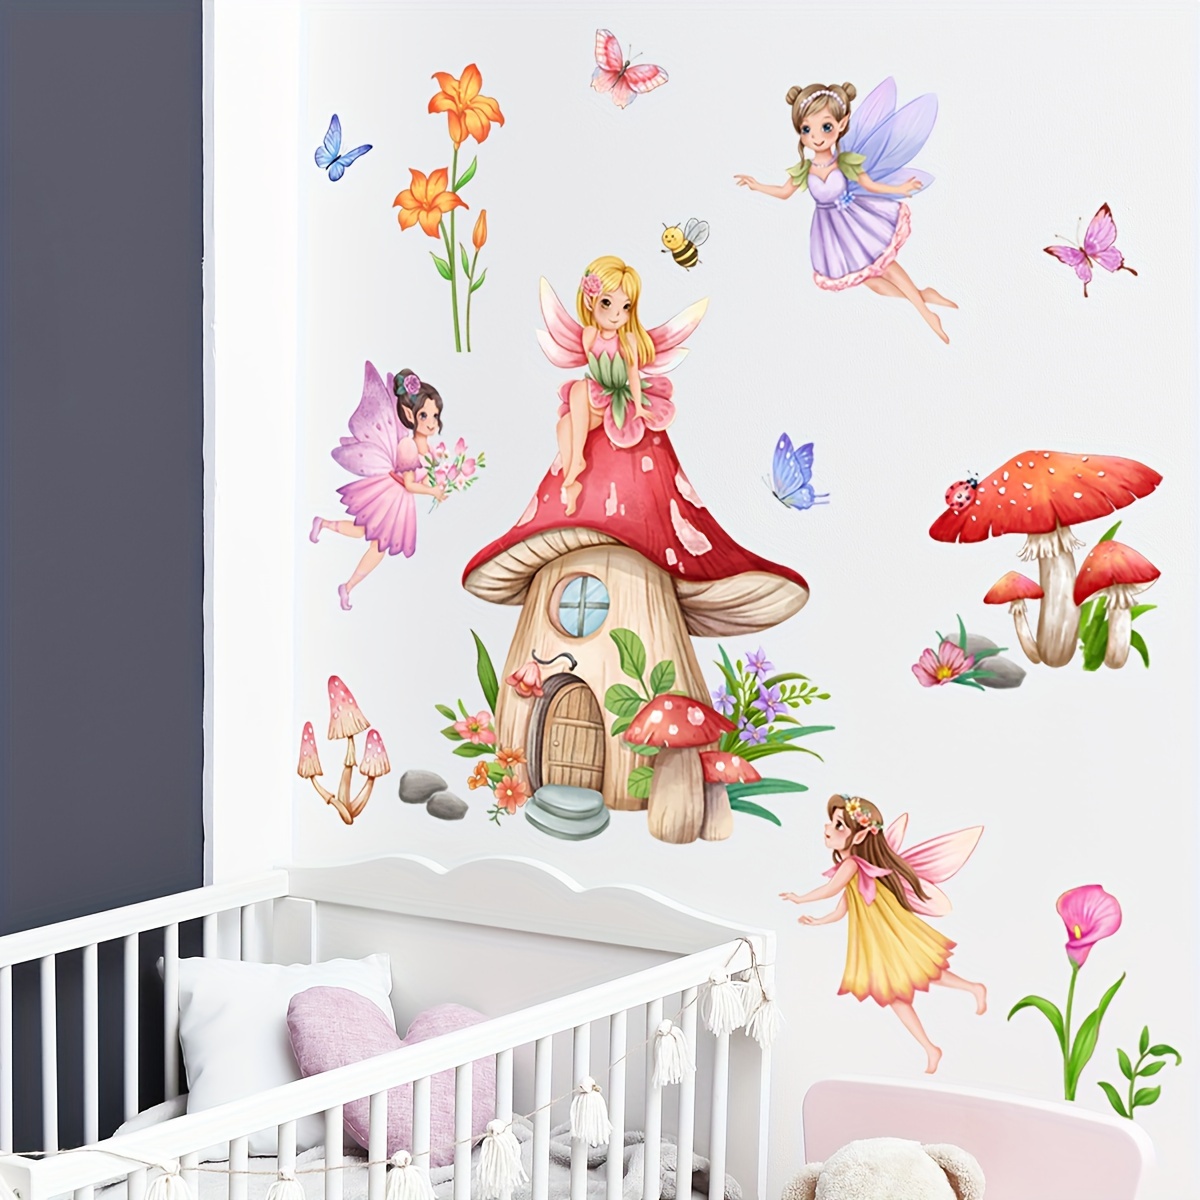 Fairy Forest Houses Self-adhesive Removable Mural, Decal, Nursery